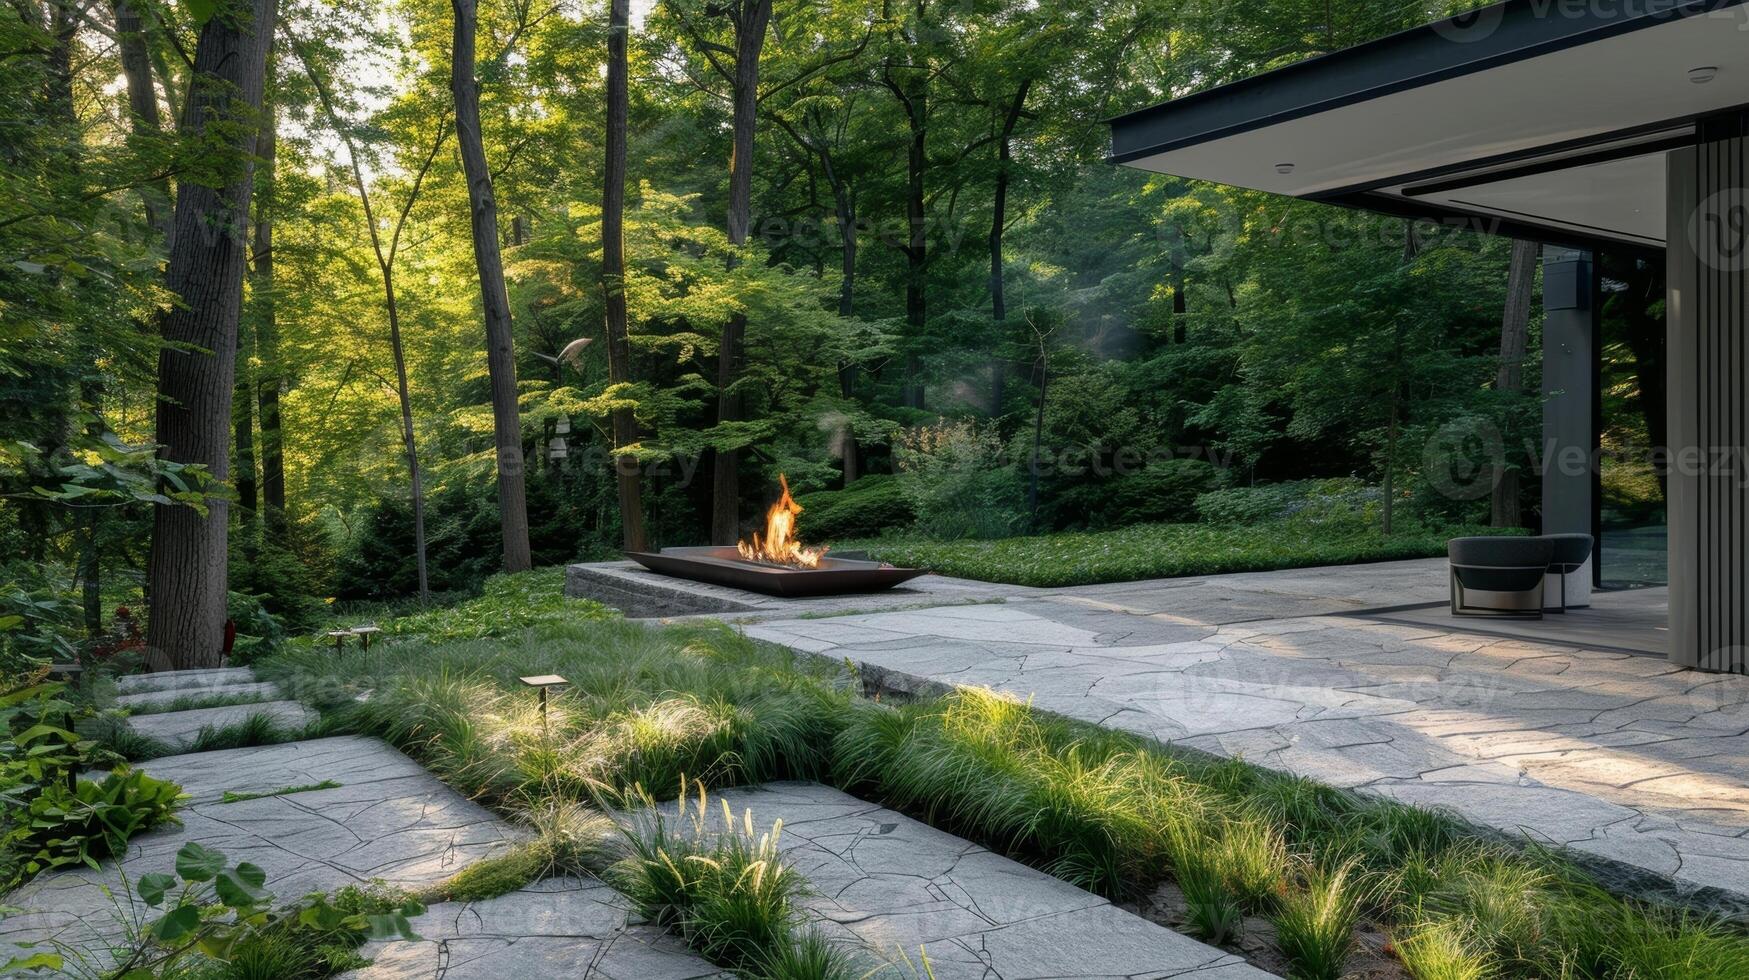 The modern fire pit is surrounded by a sleek stone patio and lush greenery. 2d flat cartoon photo